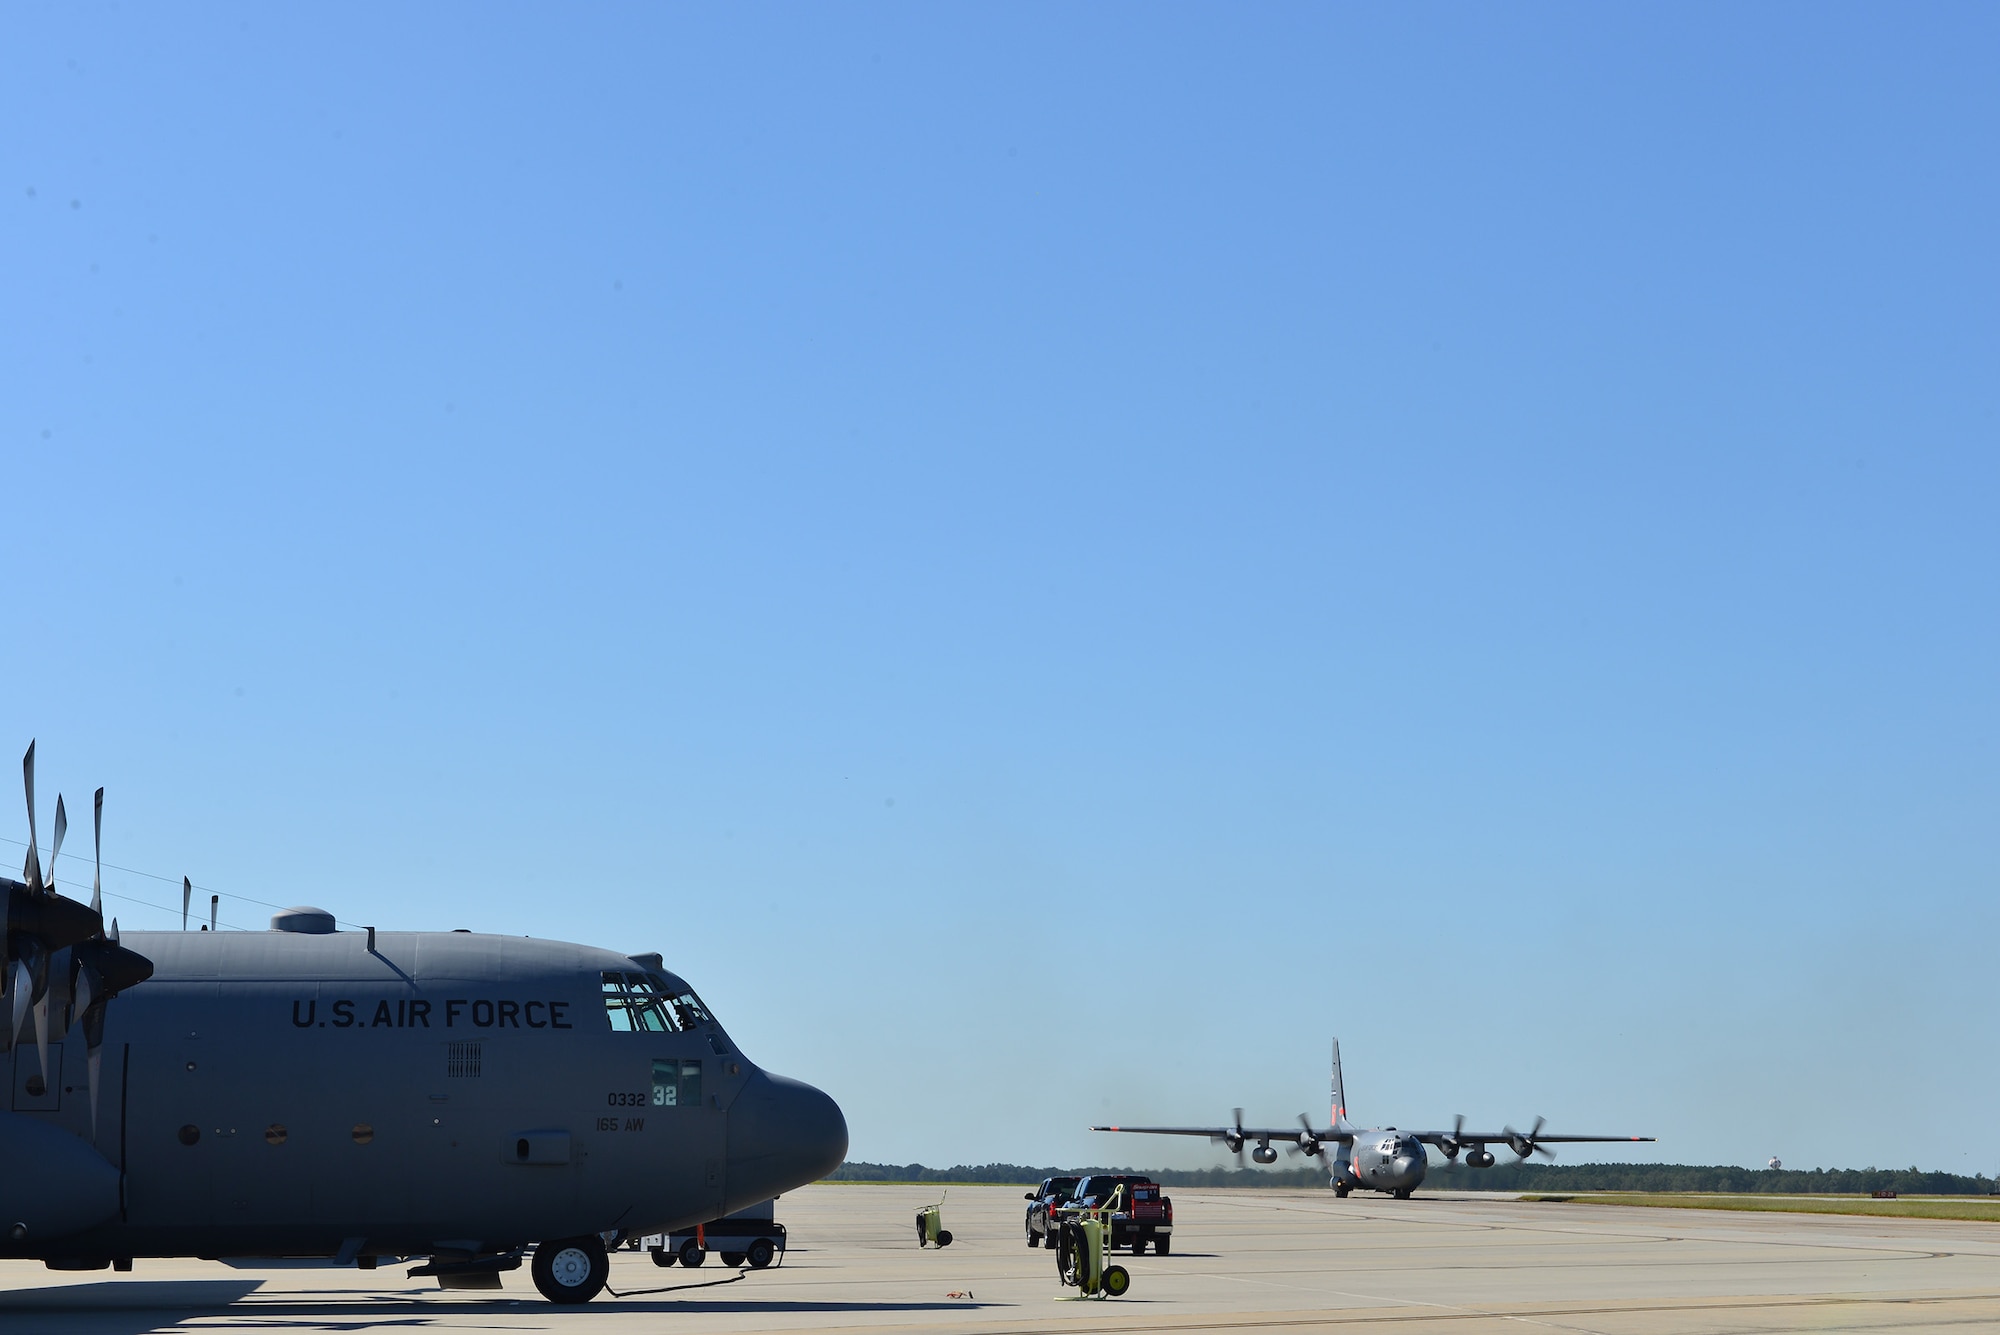 U.S. Air Force C-130H3 Hercules lands on the runway at the 165th Airlift Wing, Savannah, Ga. Oct. 15, 2015. The 165th Airlift Wing received the first of eight aircraft upgrades expected to take place through 2016. The upgrades will better allow the Georgia Air National Guard unit to support State, Federal, and worldwide contingencies. (Air National Guard photo by Tech. Sgt. Amber Williams/Released)